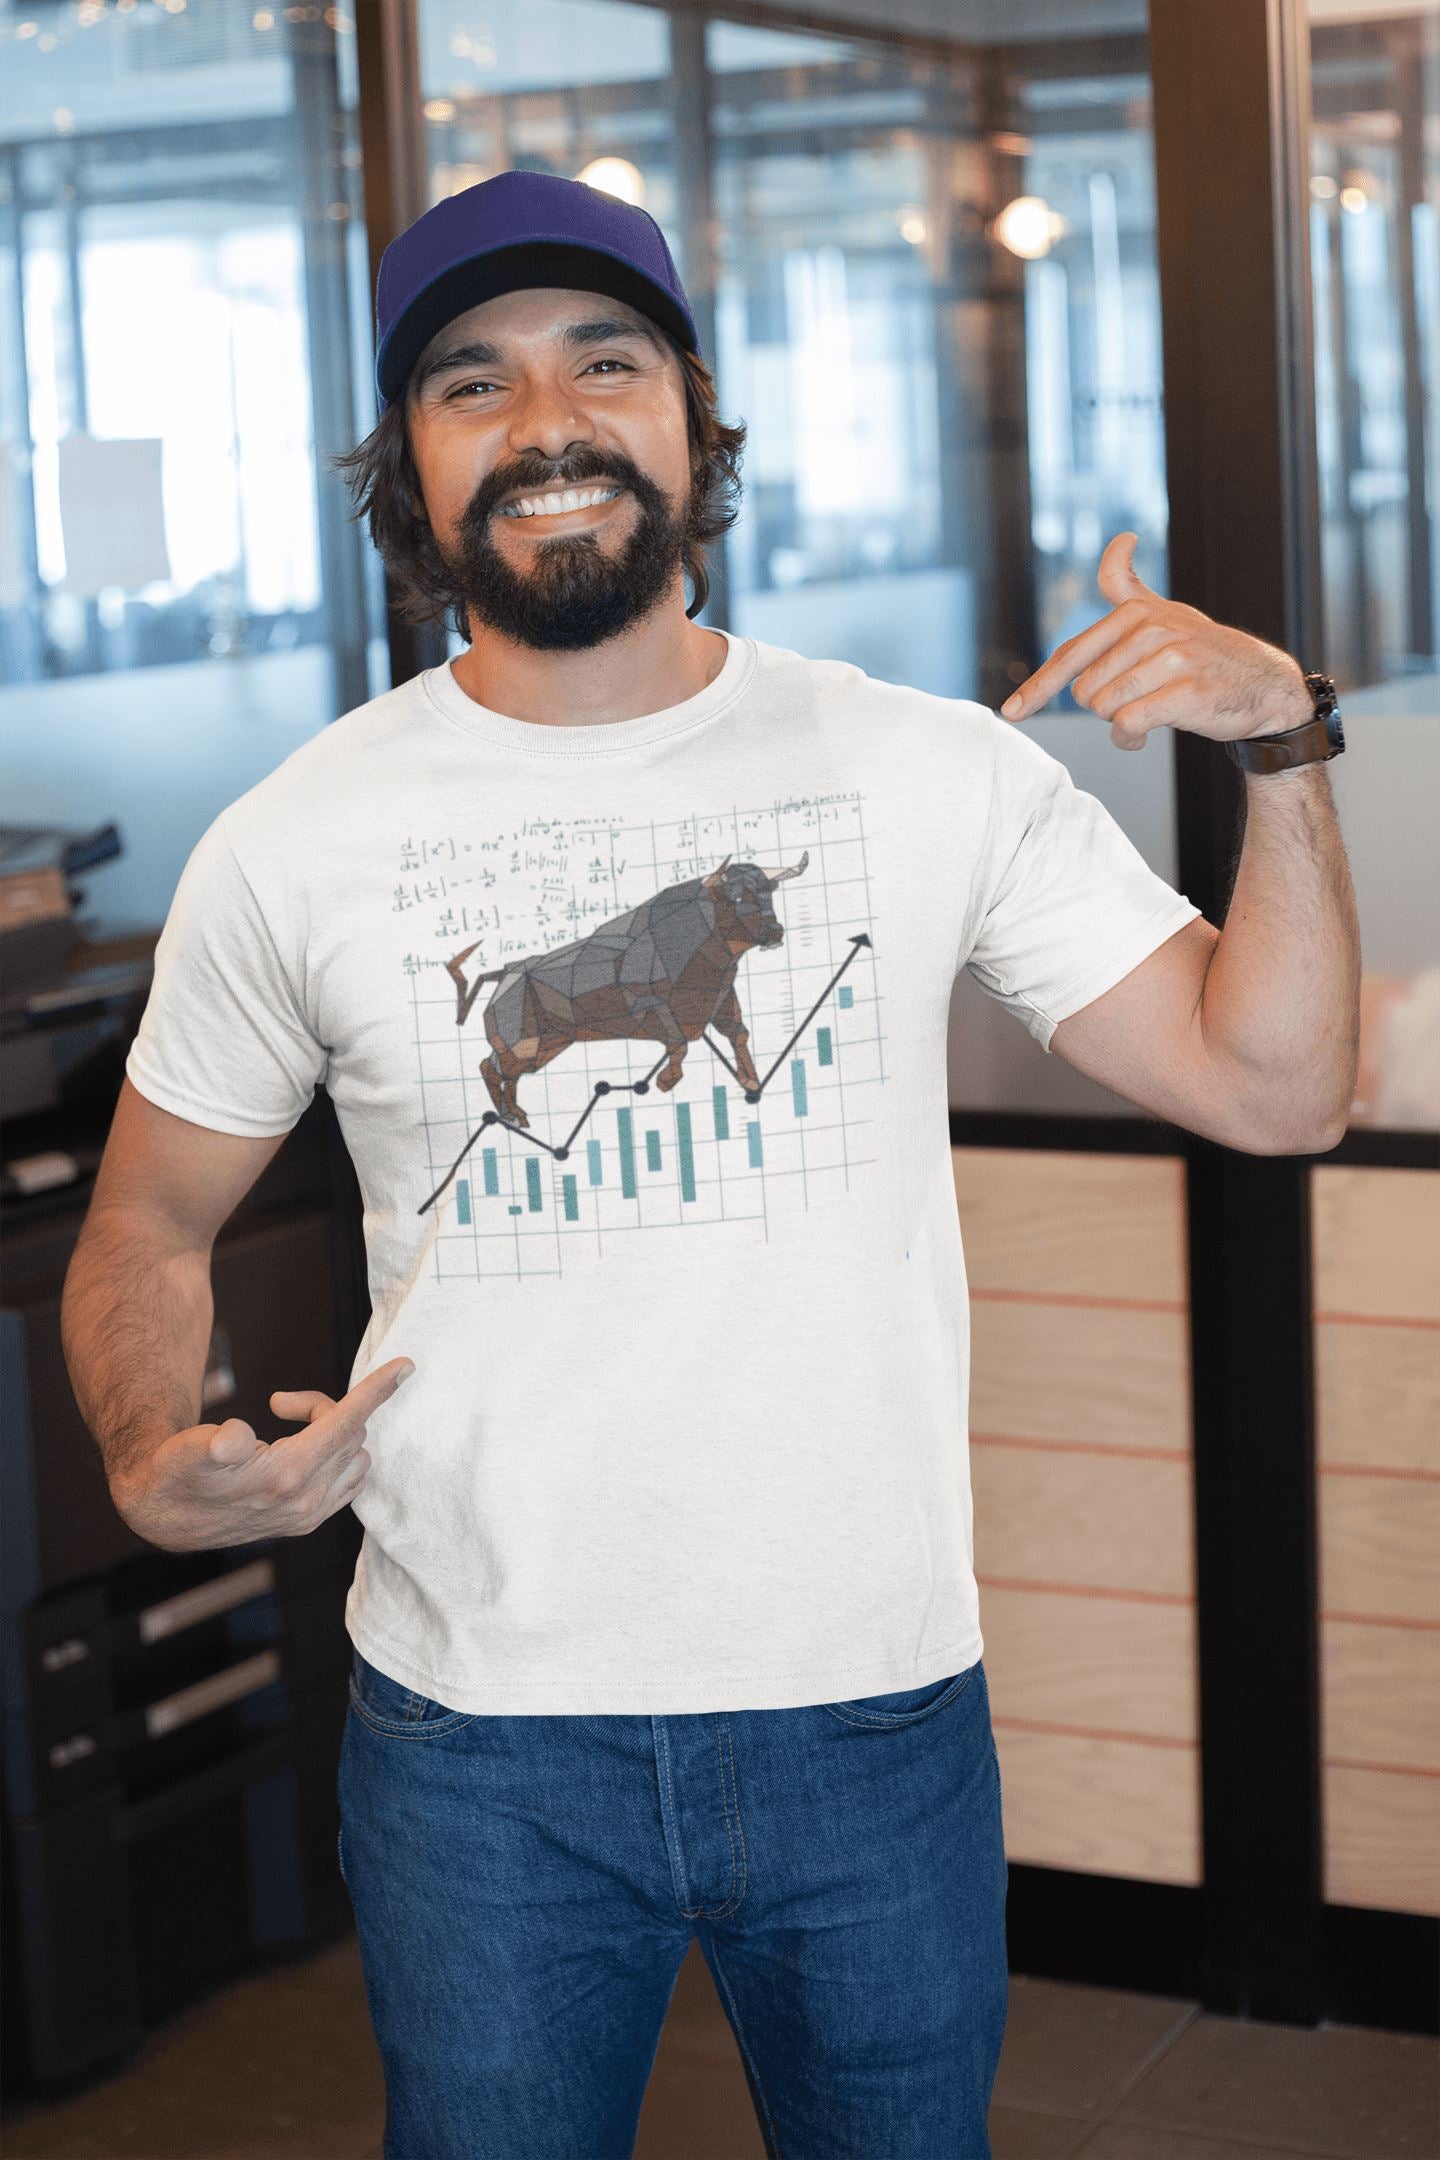 Bull Market Trend Exclusive White T Shirt for Investor Men and Women - Catch My Drift India  clothing, general, made in india, nifty, sensex, shirt, stock market, t shirt, trader, trading, tr